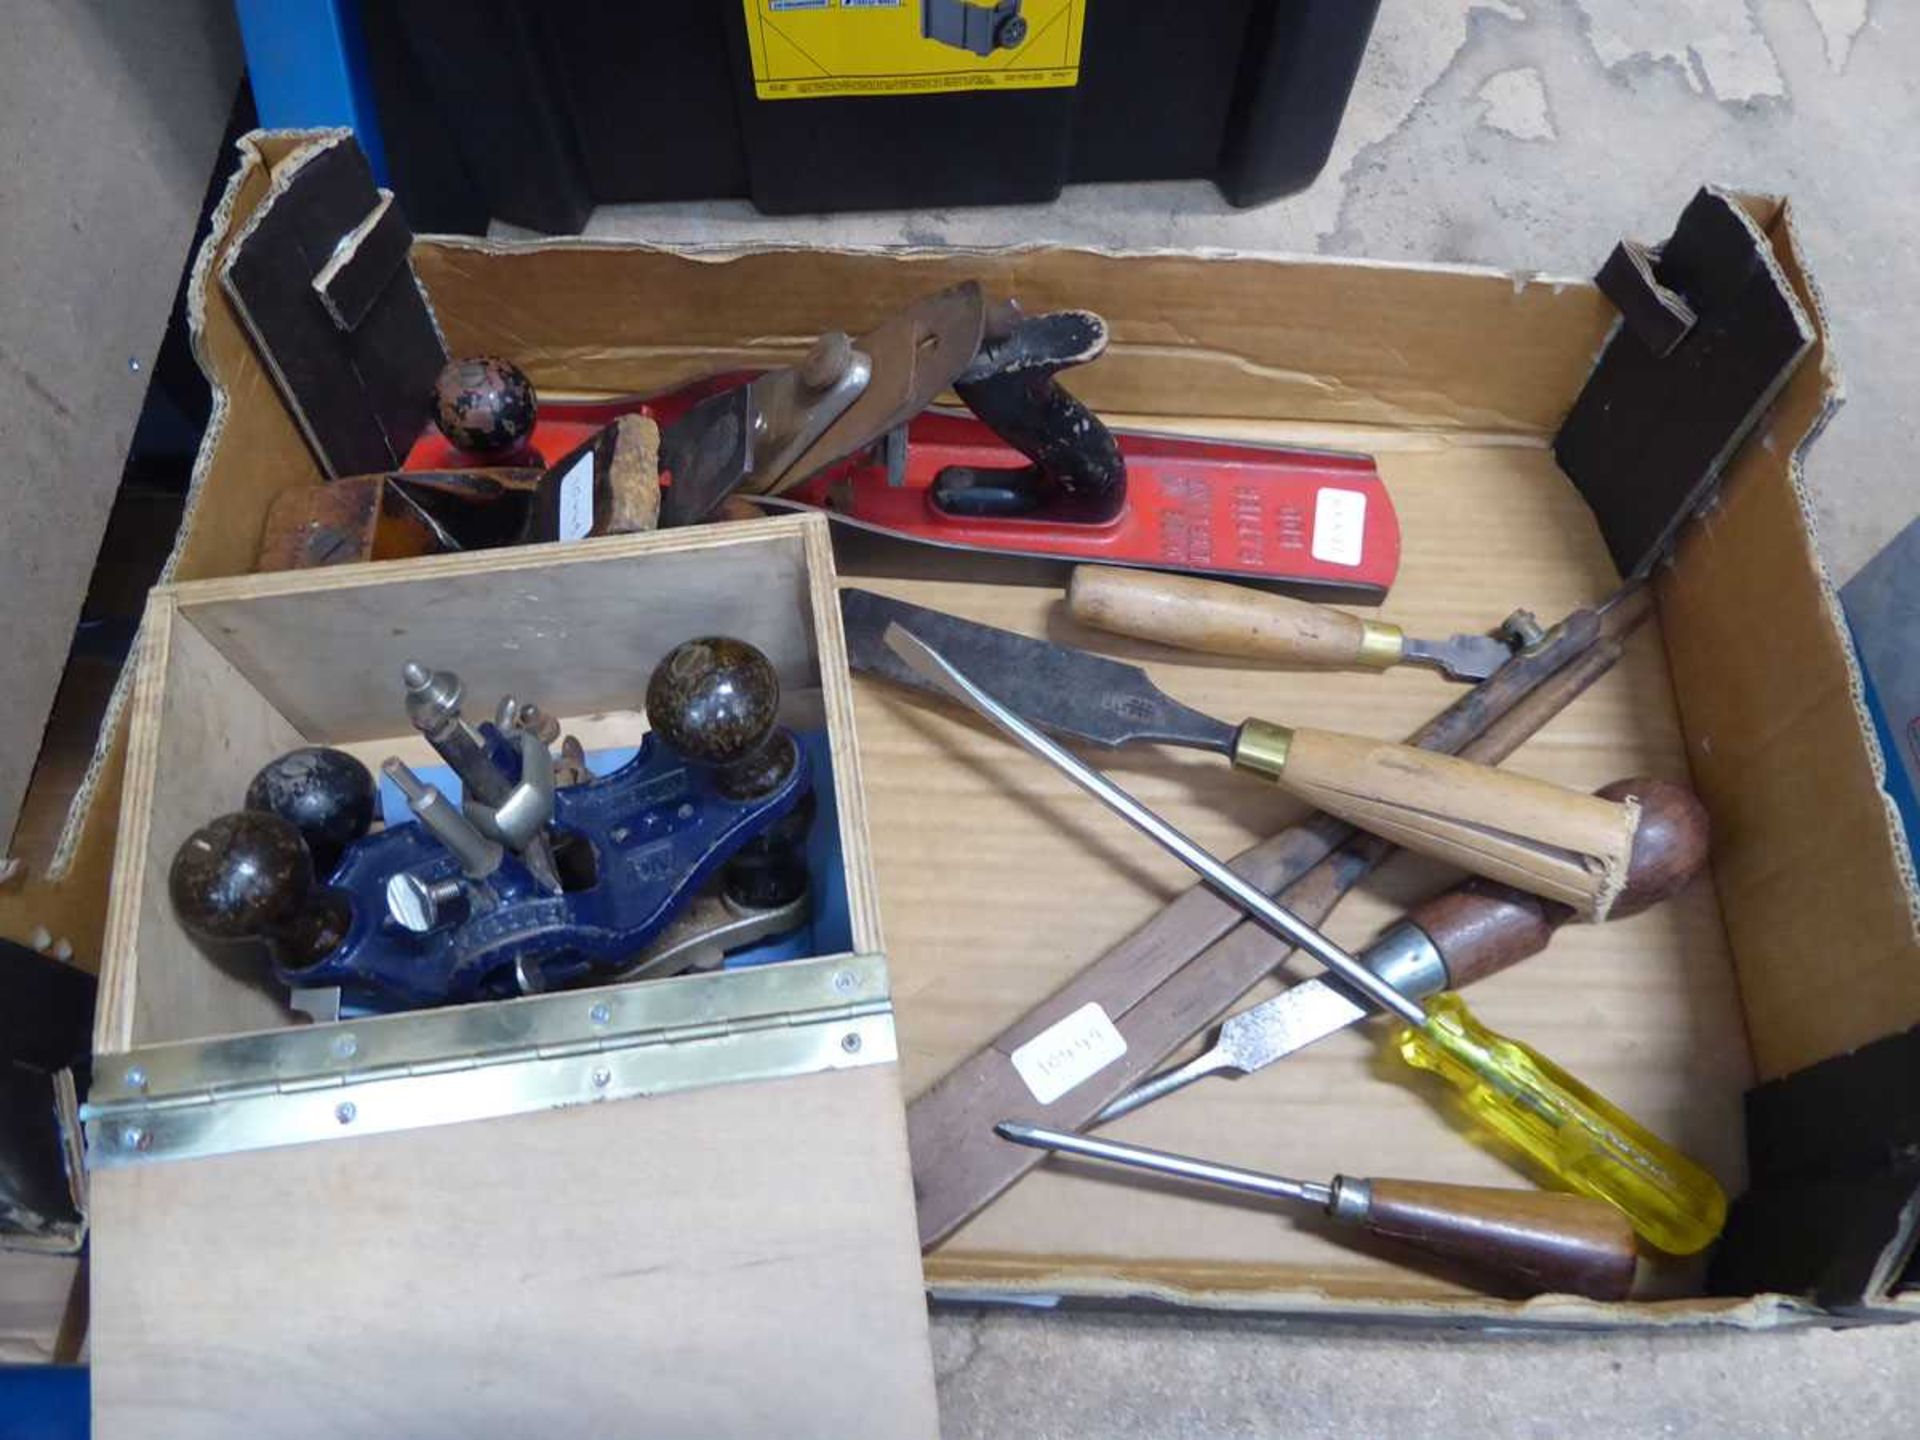 Record router plane, wooden plane, metal plane and screwdrivers